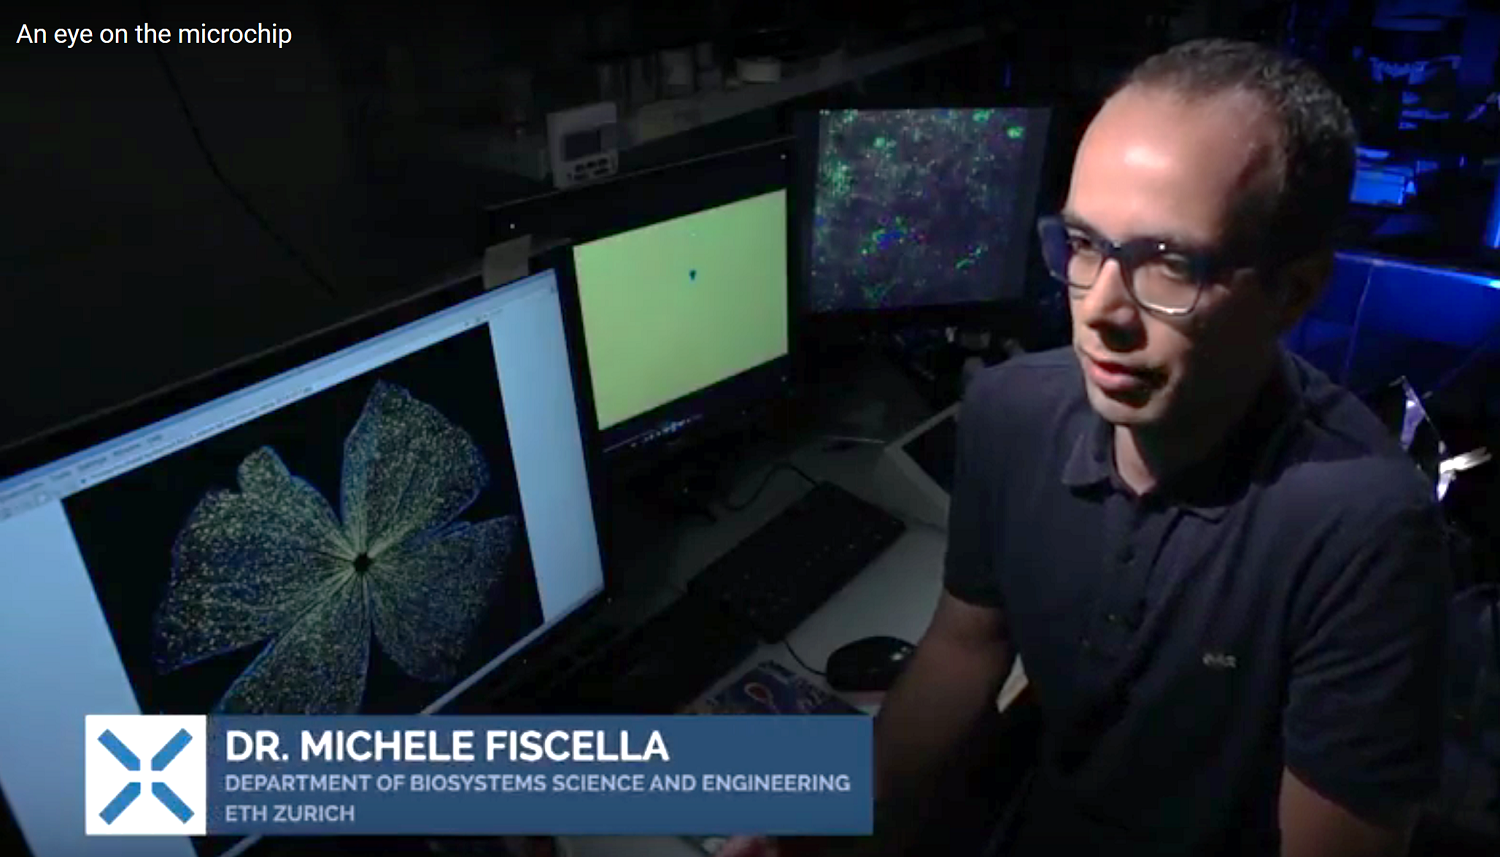 Enlarged view: Image of Michele Fiscellab